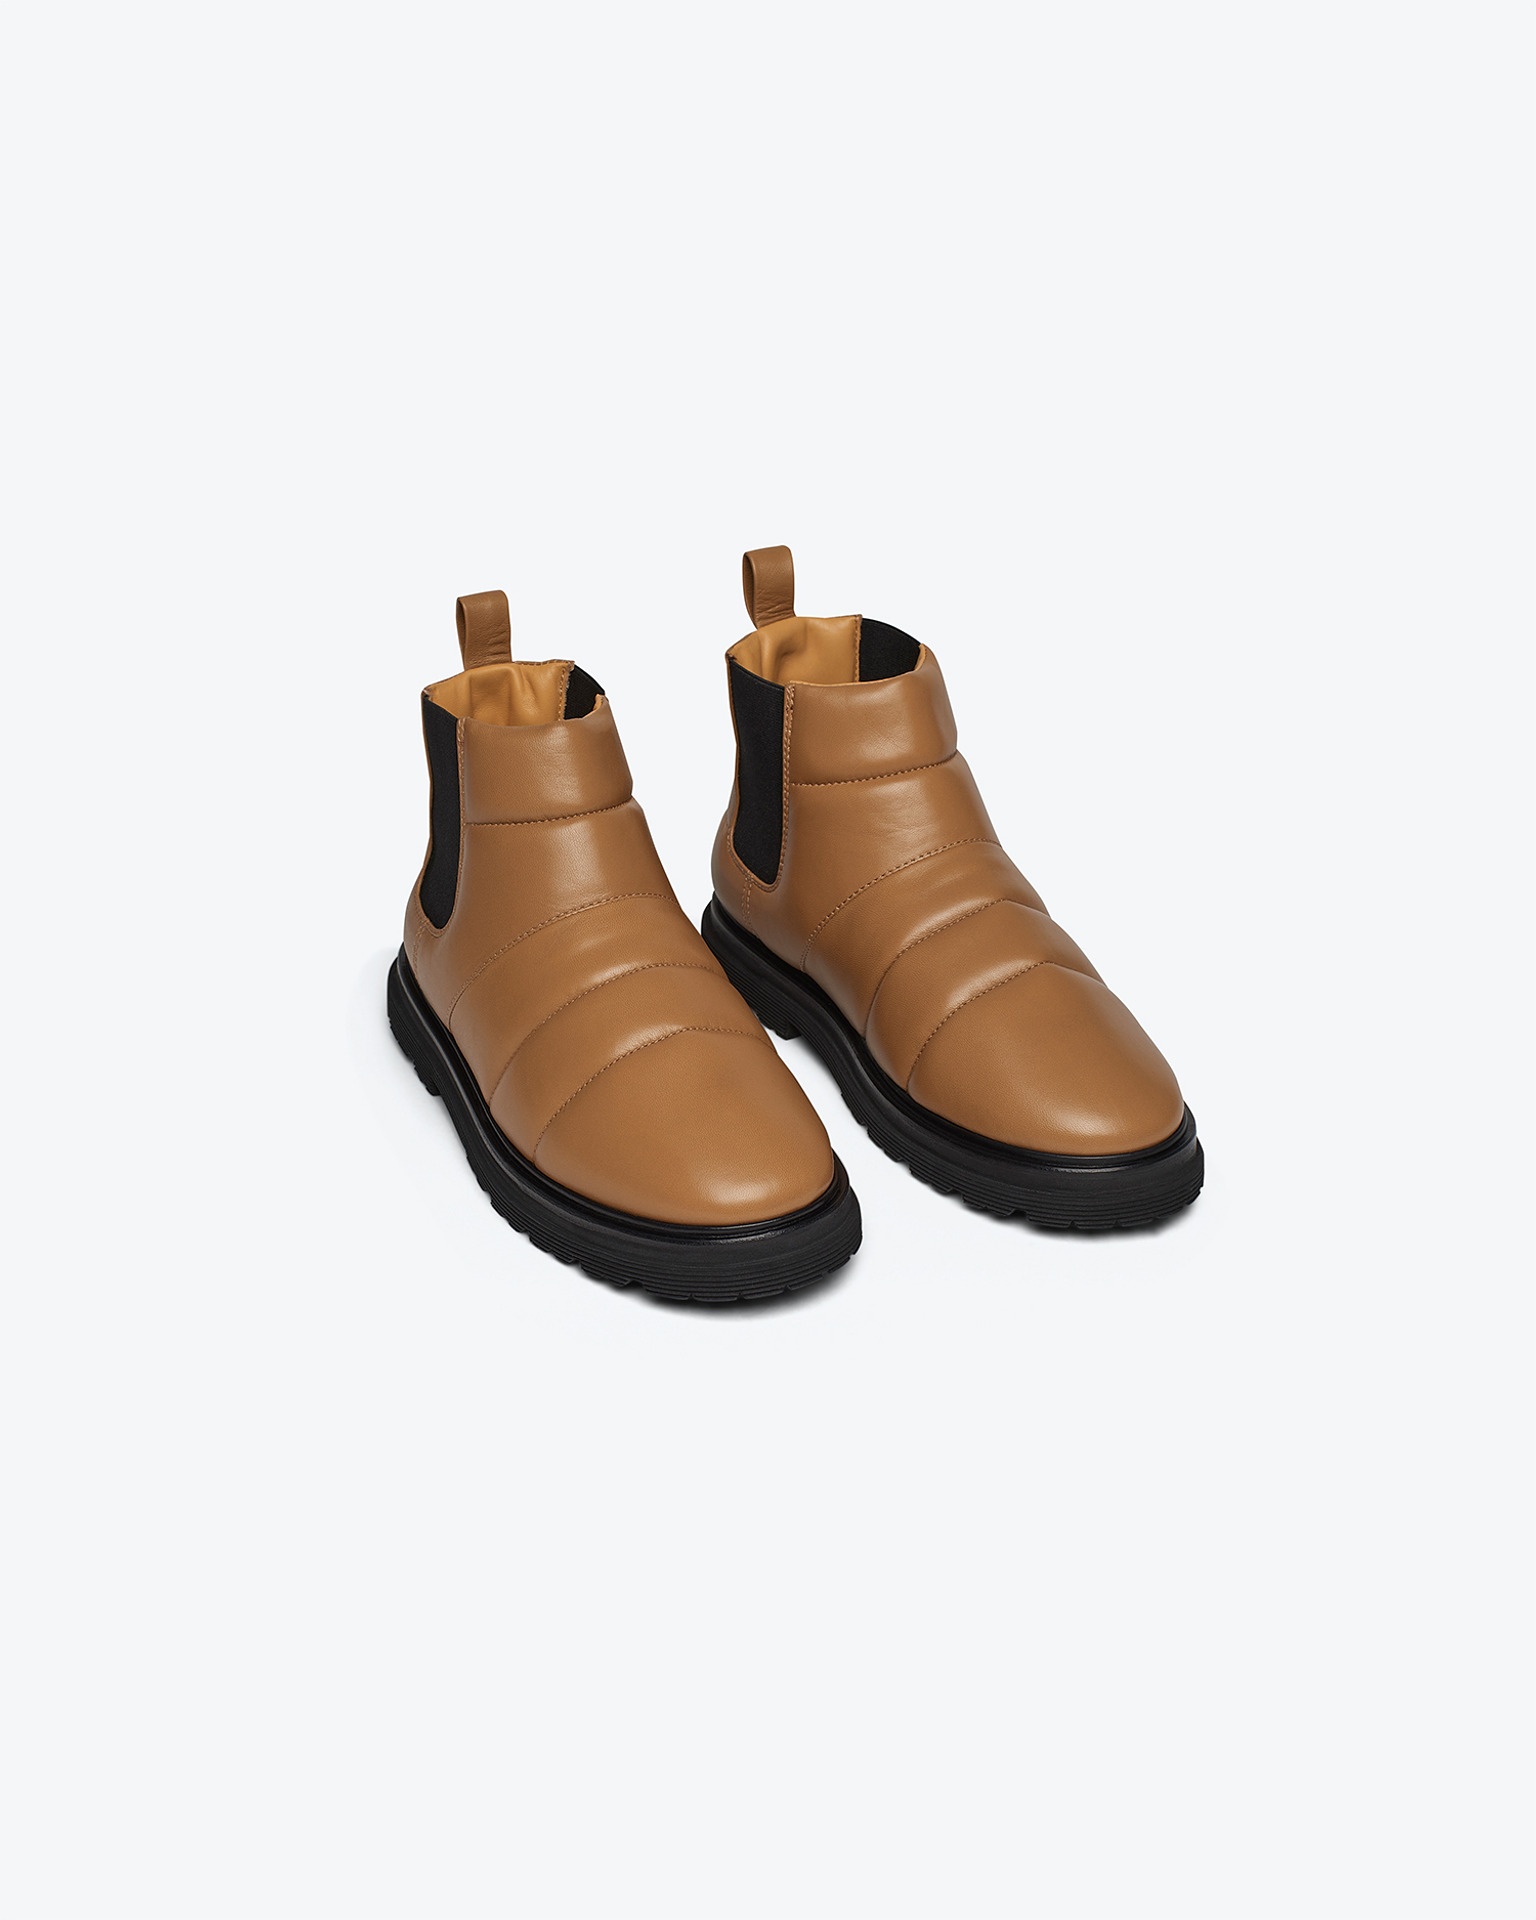 BEDE - Rounded toe boot - Nut brown - 1